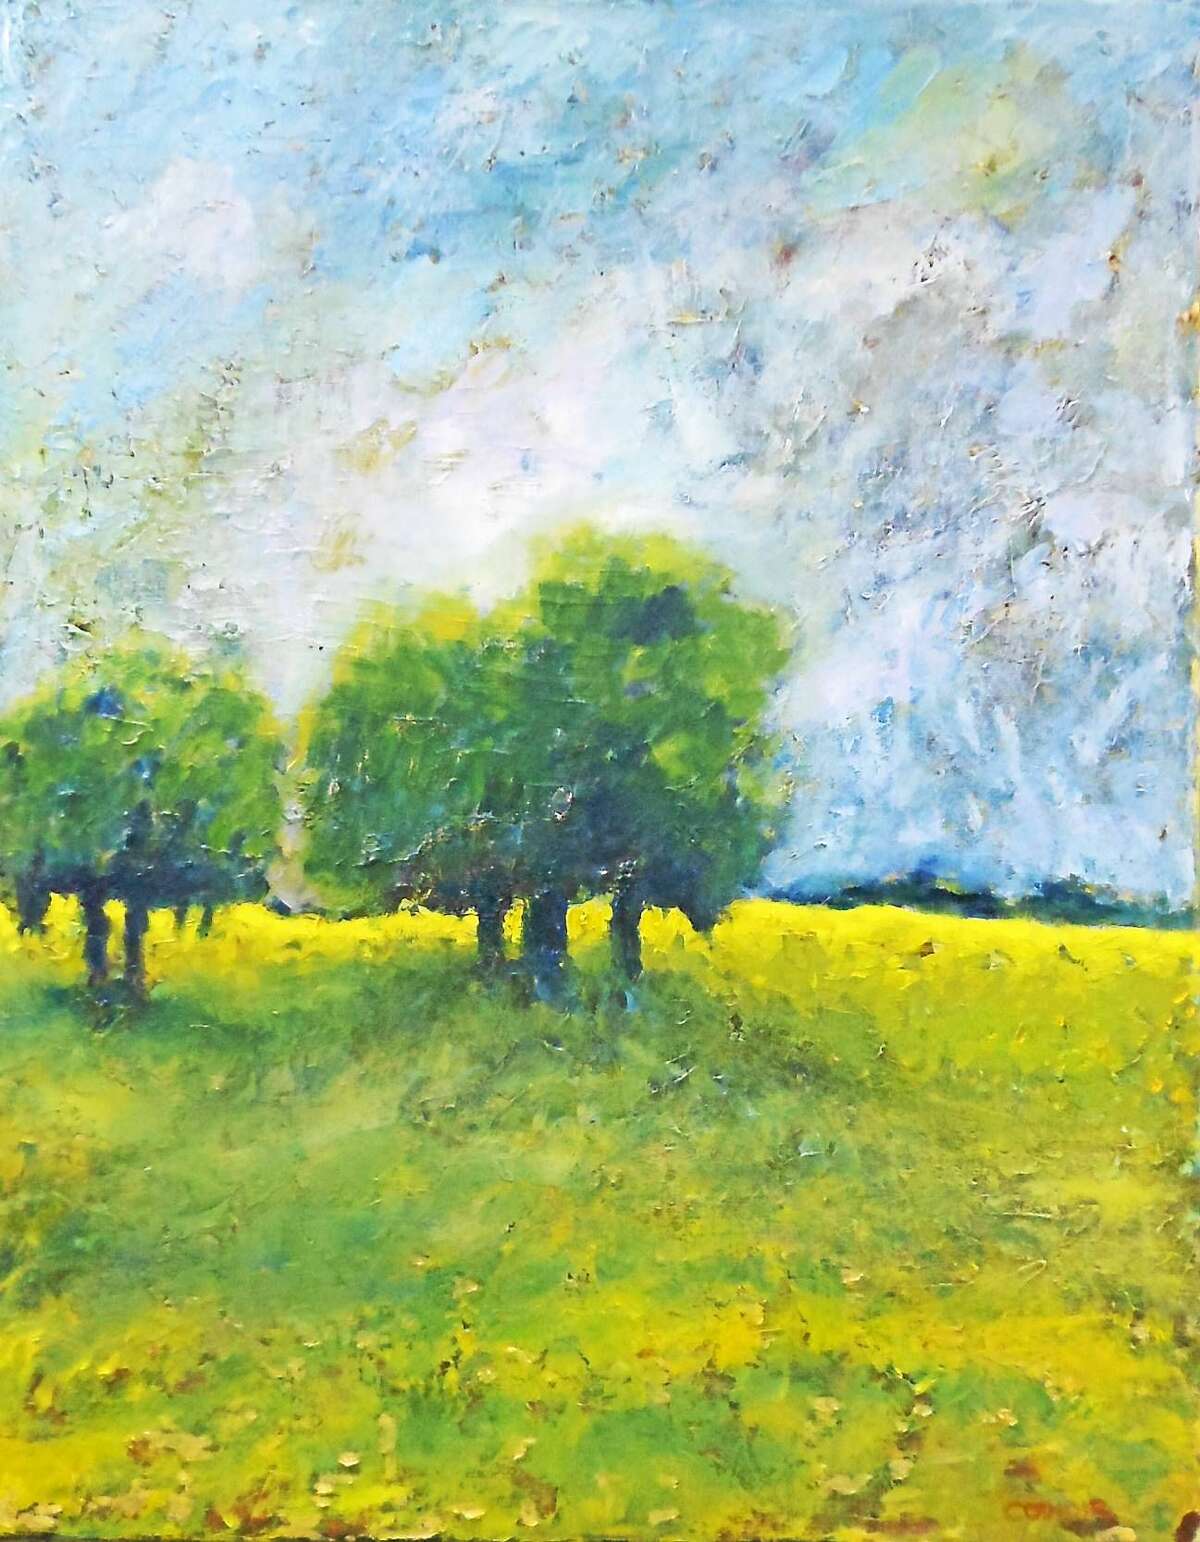 Images courtesy of the artist "Landscape with Five Trees," oil on linen, by Rosemary Cotnoir.